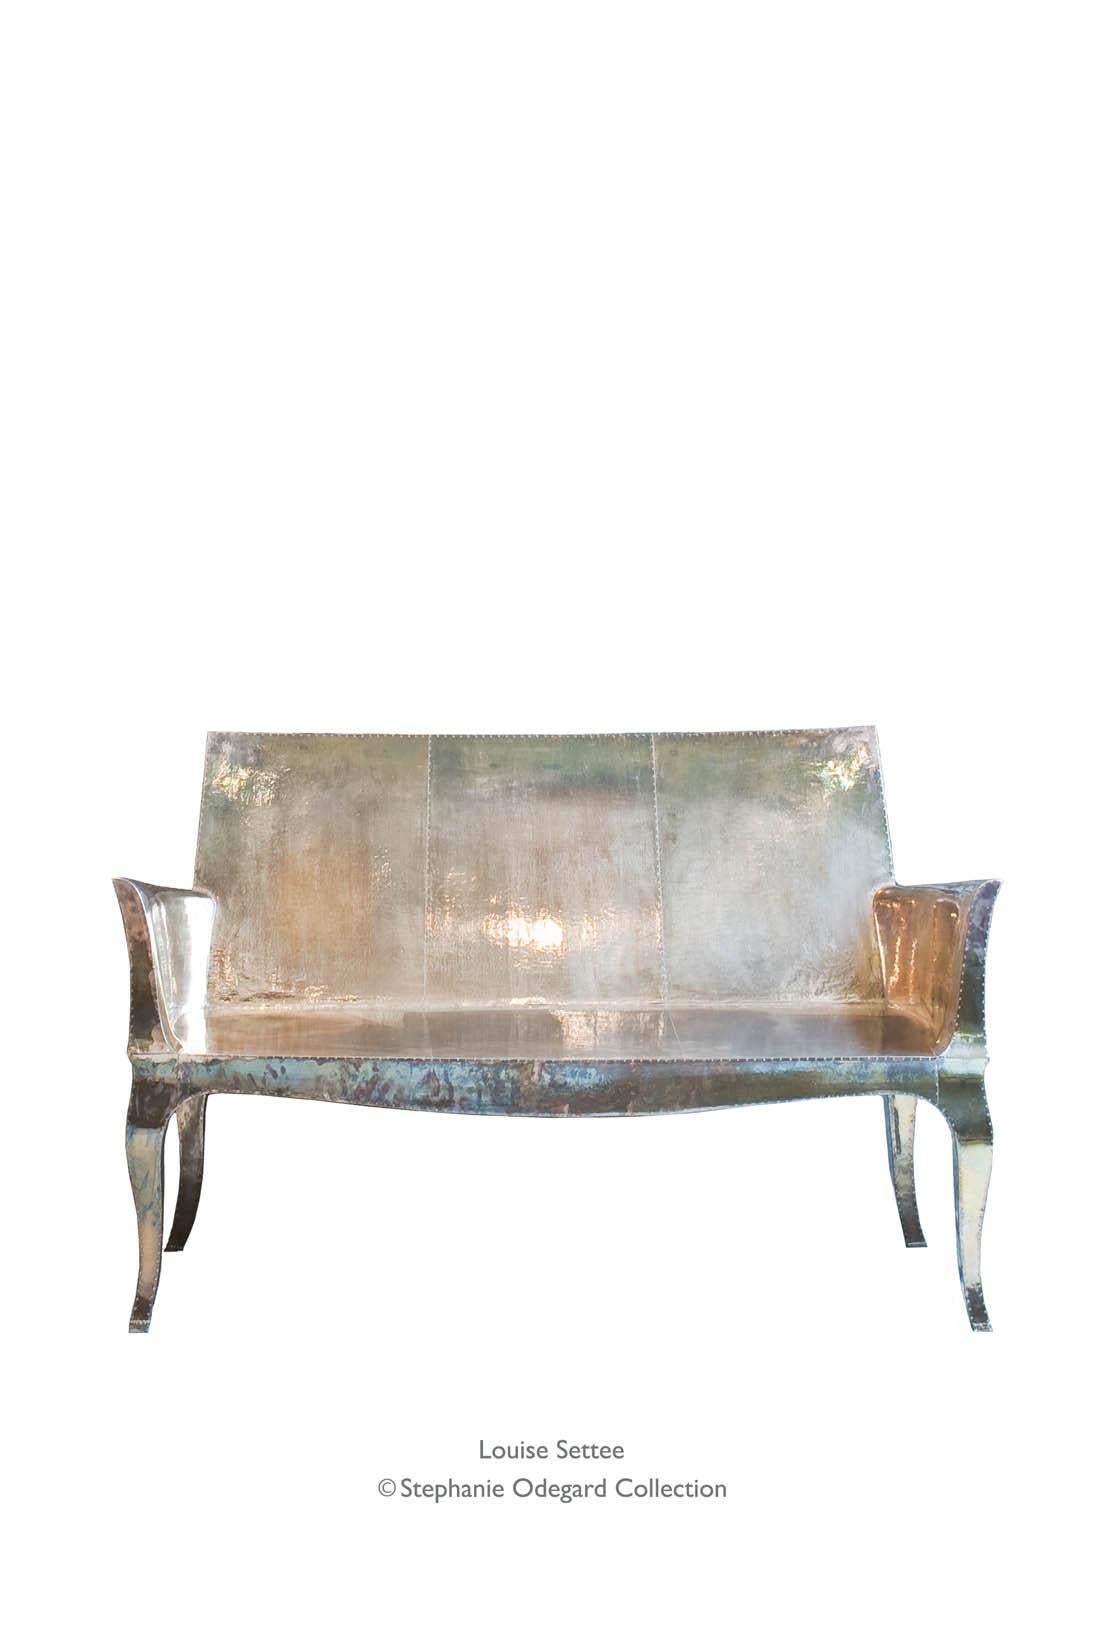 Louise Settee Art Deco Lounge Chairs in Mid. Hammered Brass by Paul Mathieu For Sale 6